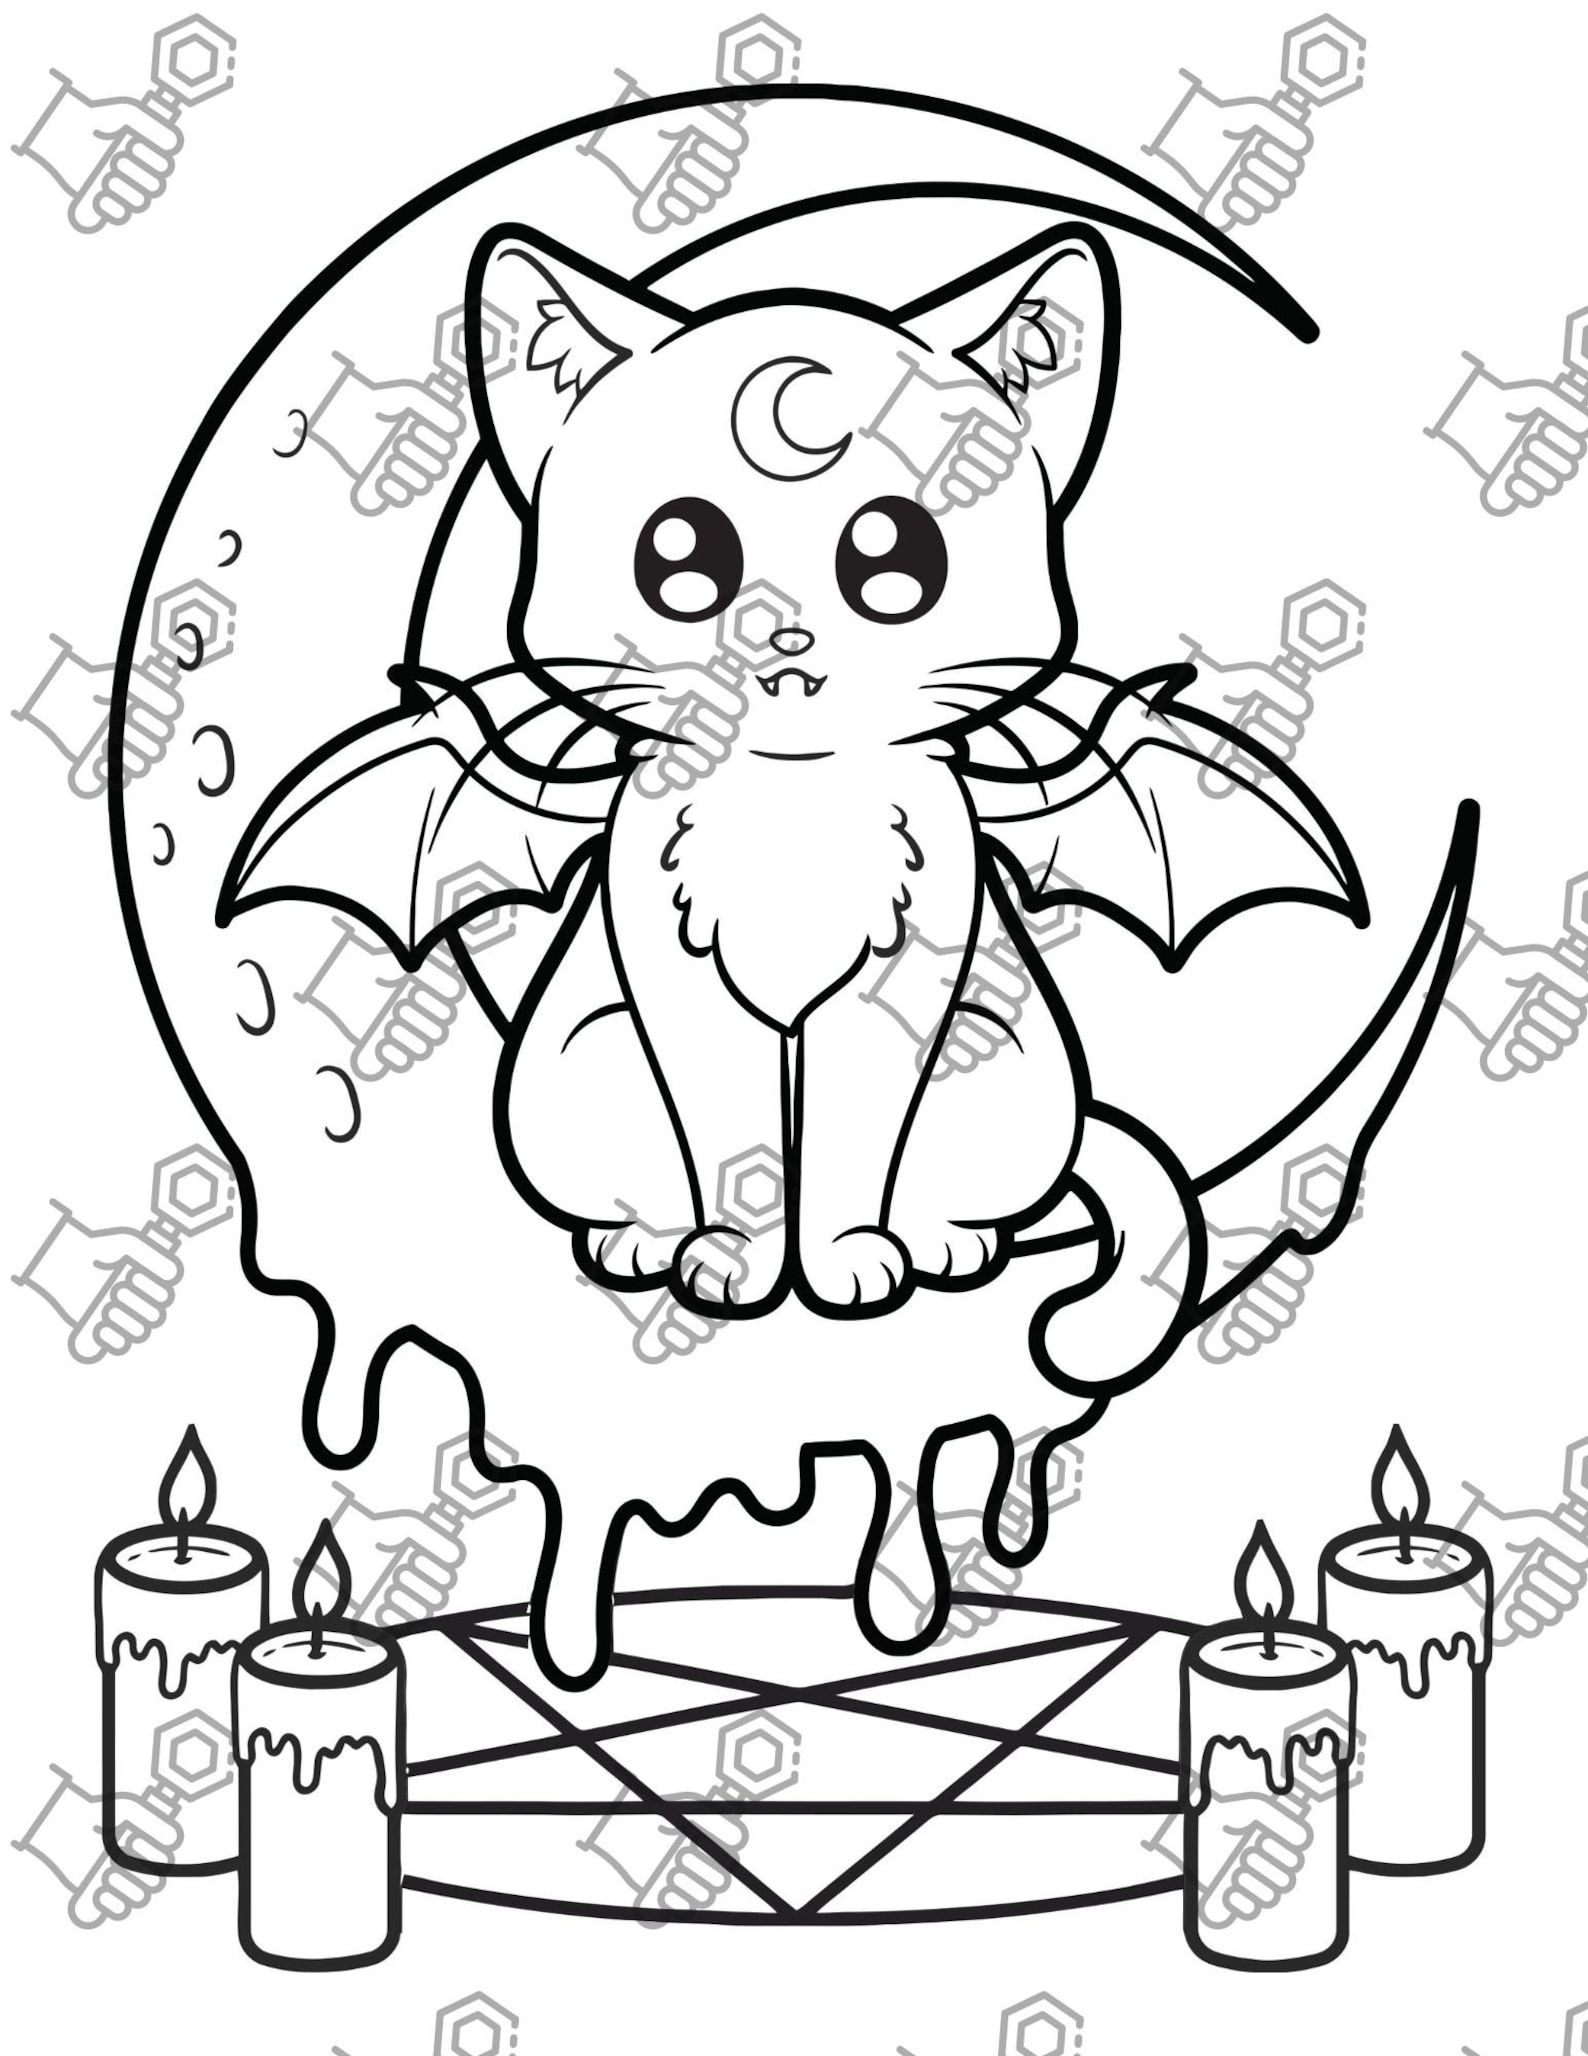 12 Pastel Goth Coloring Pages Cute and Creepy Coloring Page - Etsy Hong ...